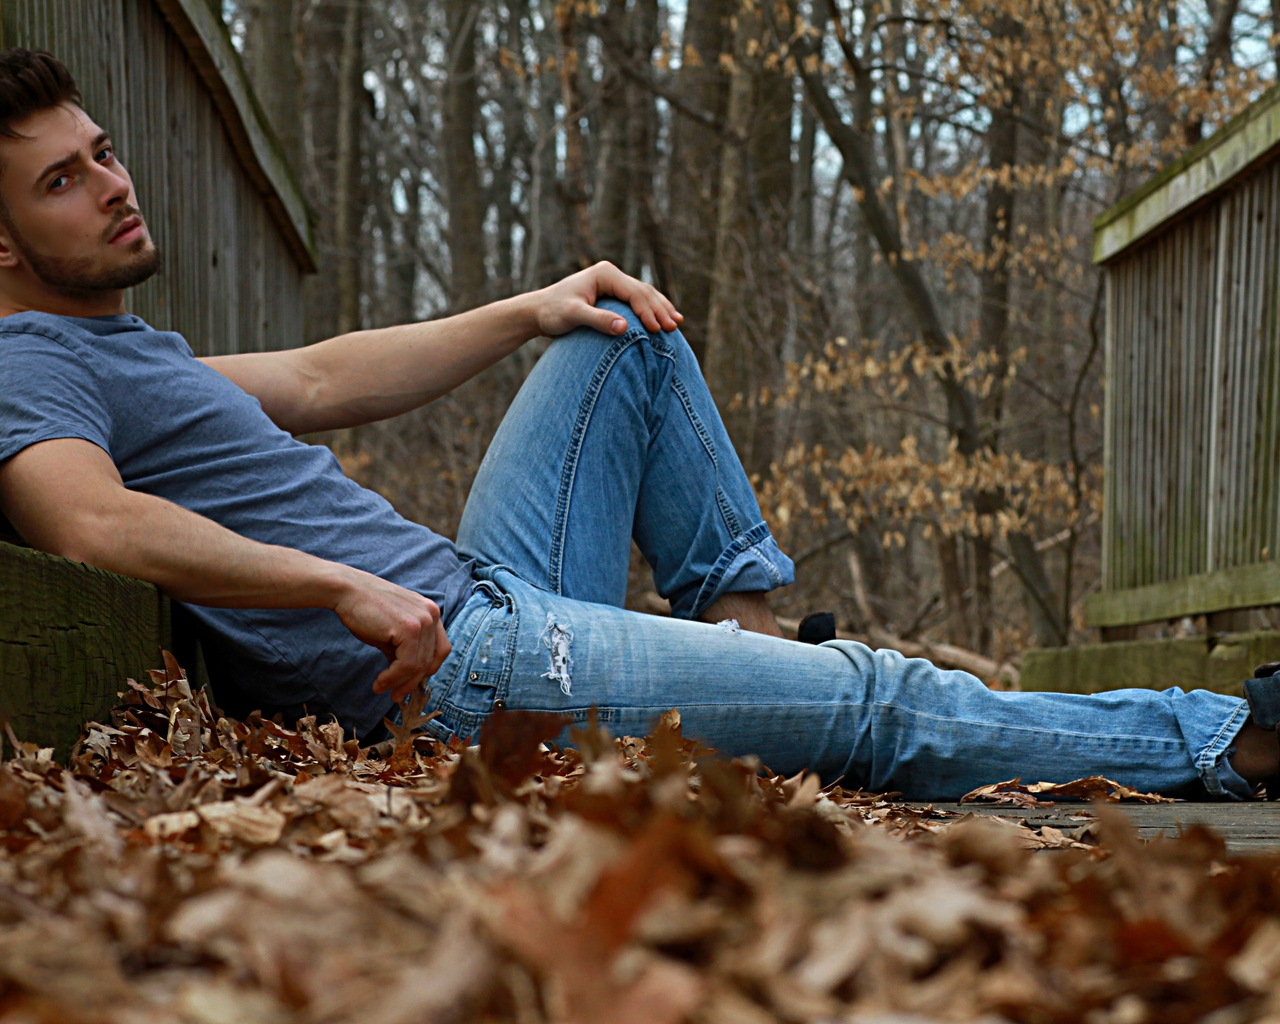 Image: Male, guy, face, lies, autumn, leaves, nature, relax, fencing